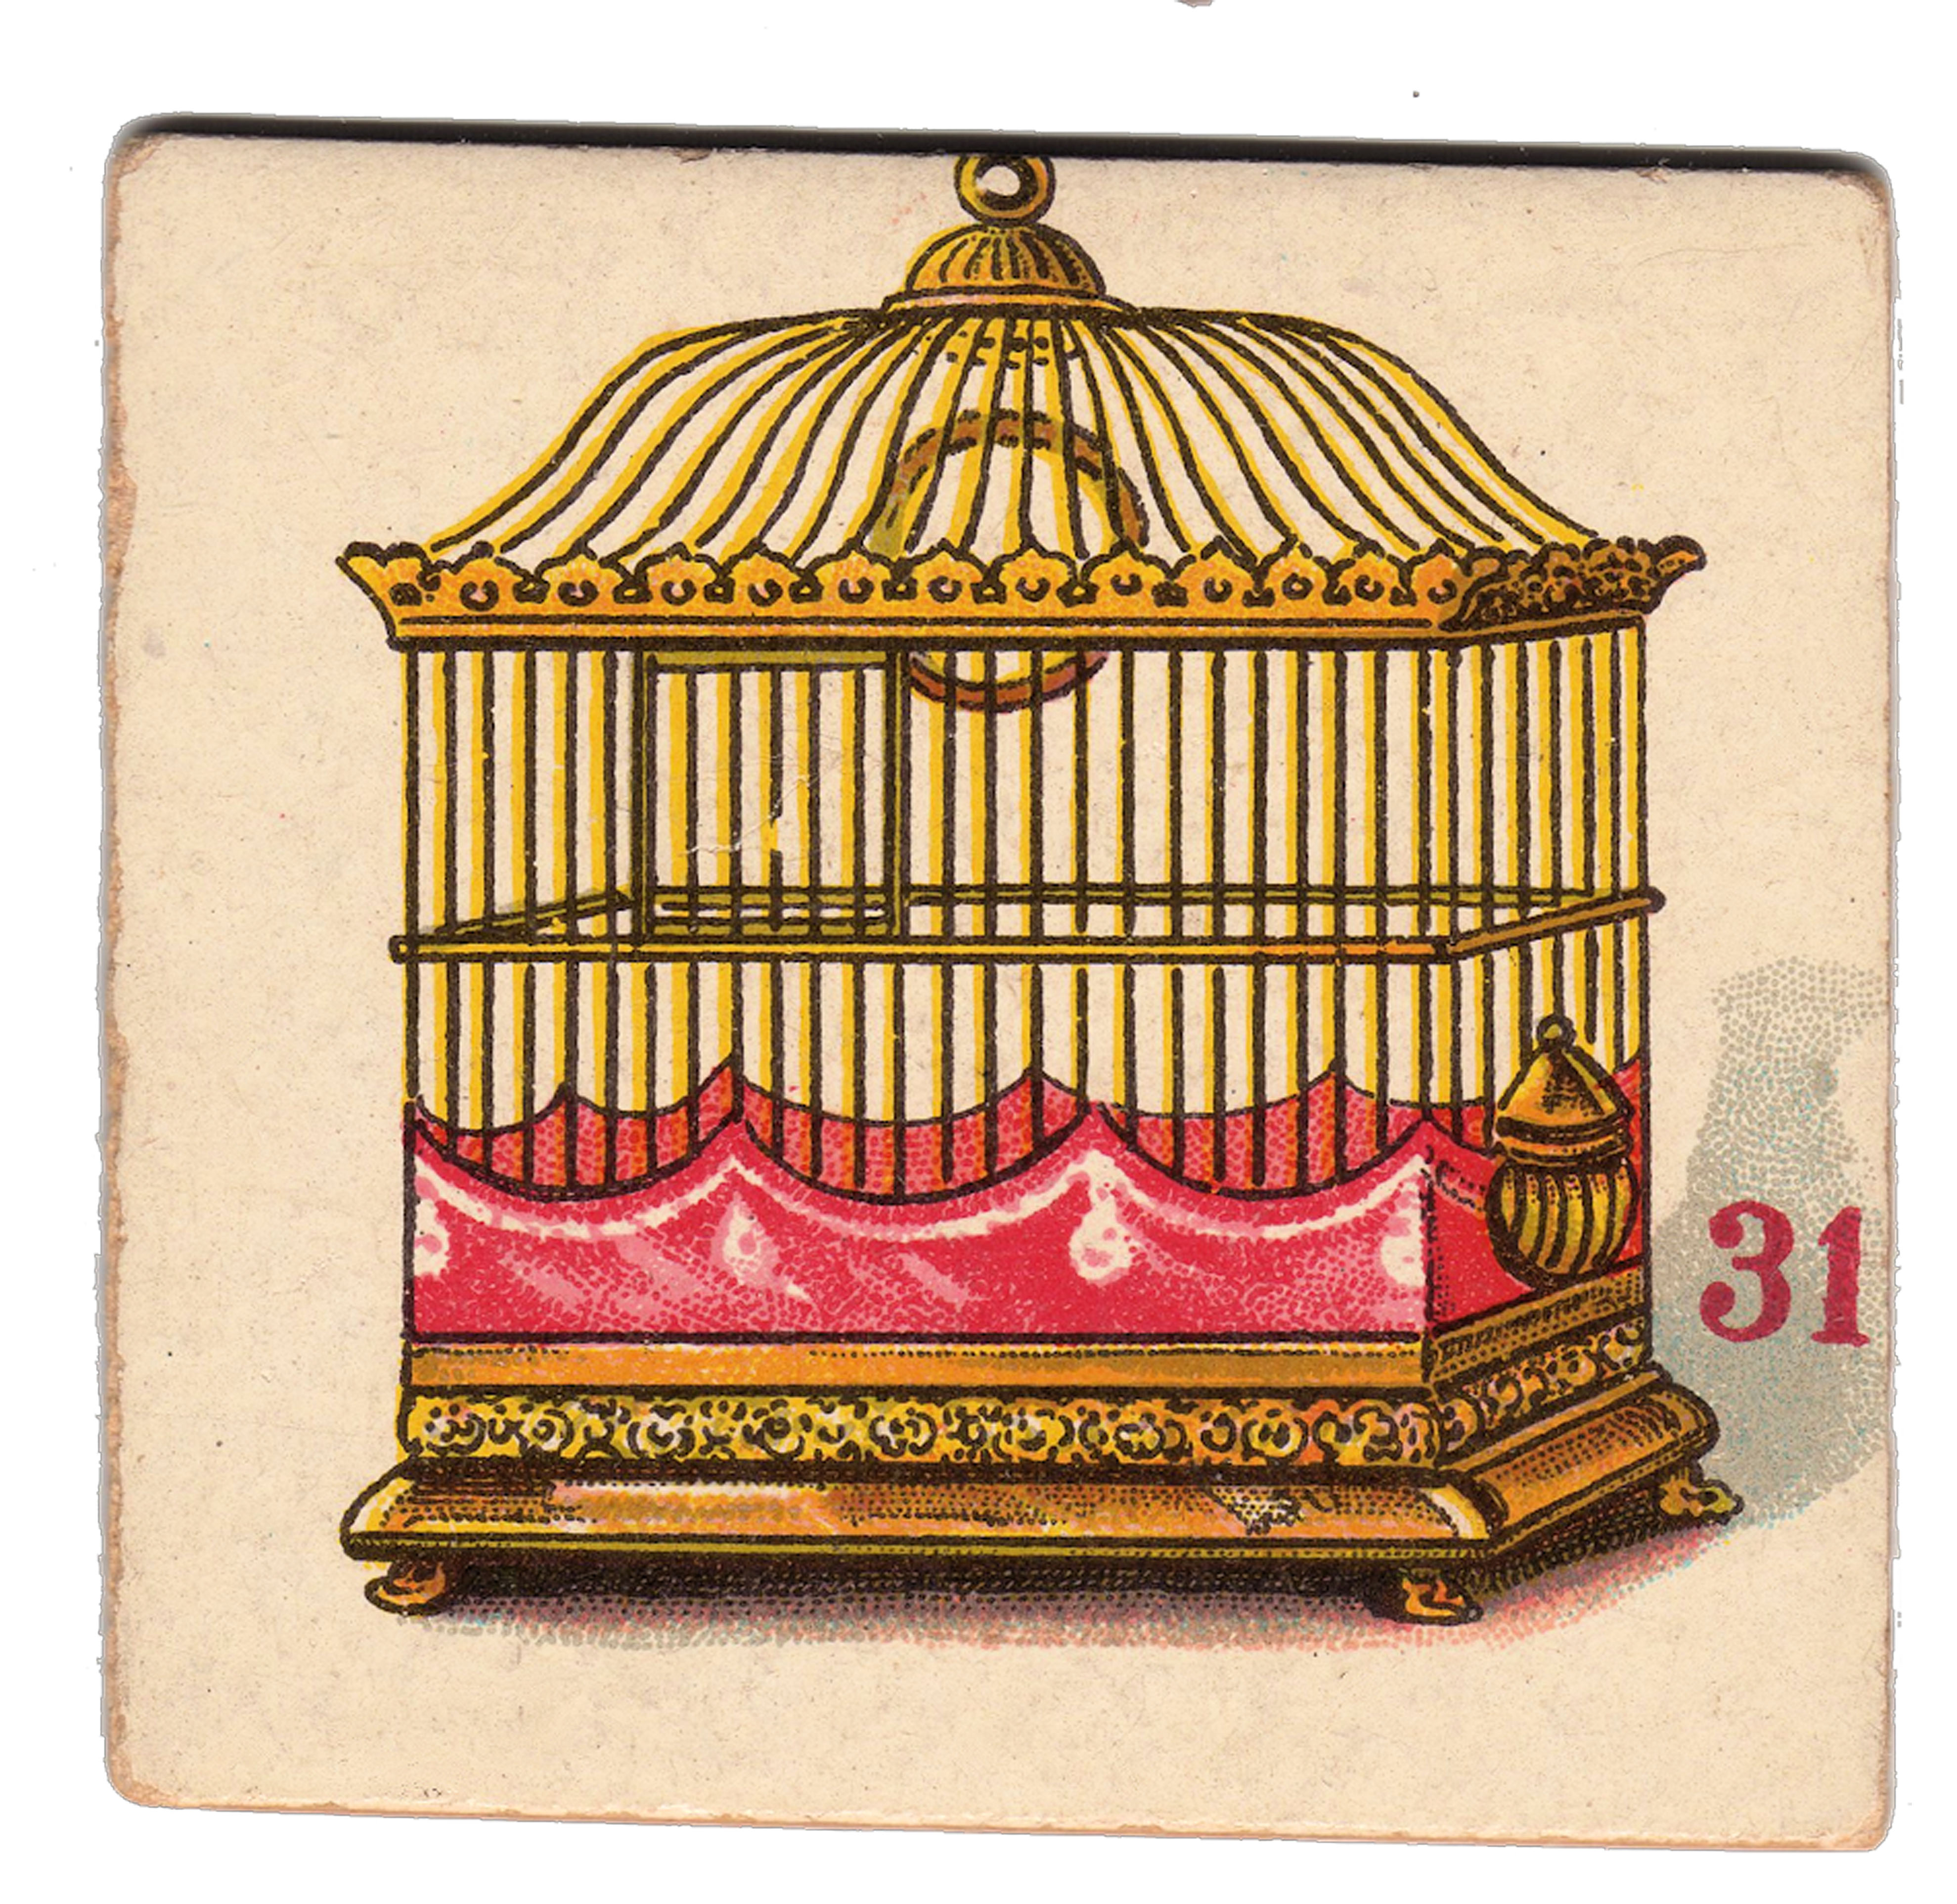 simple birdcage drawing